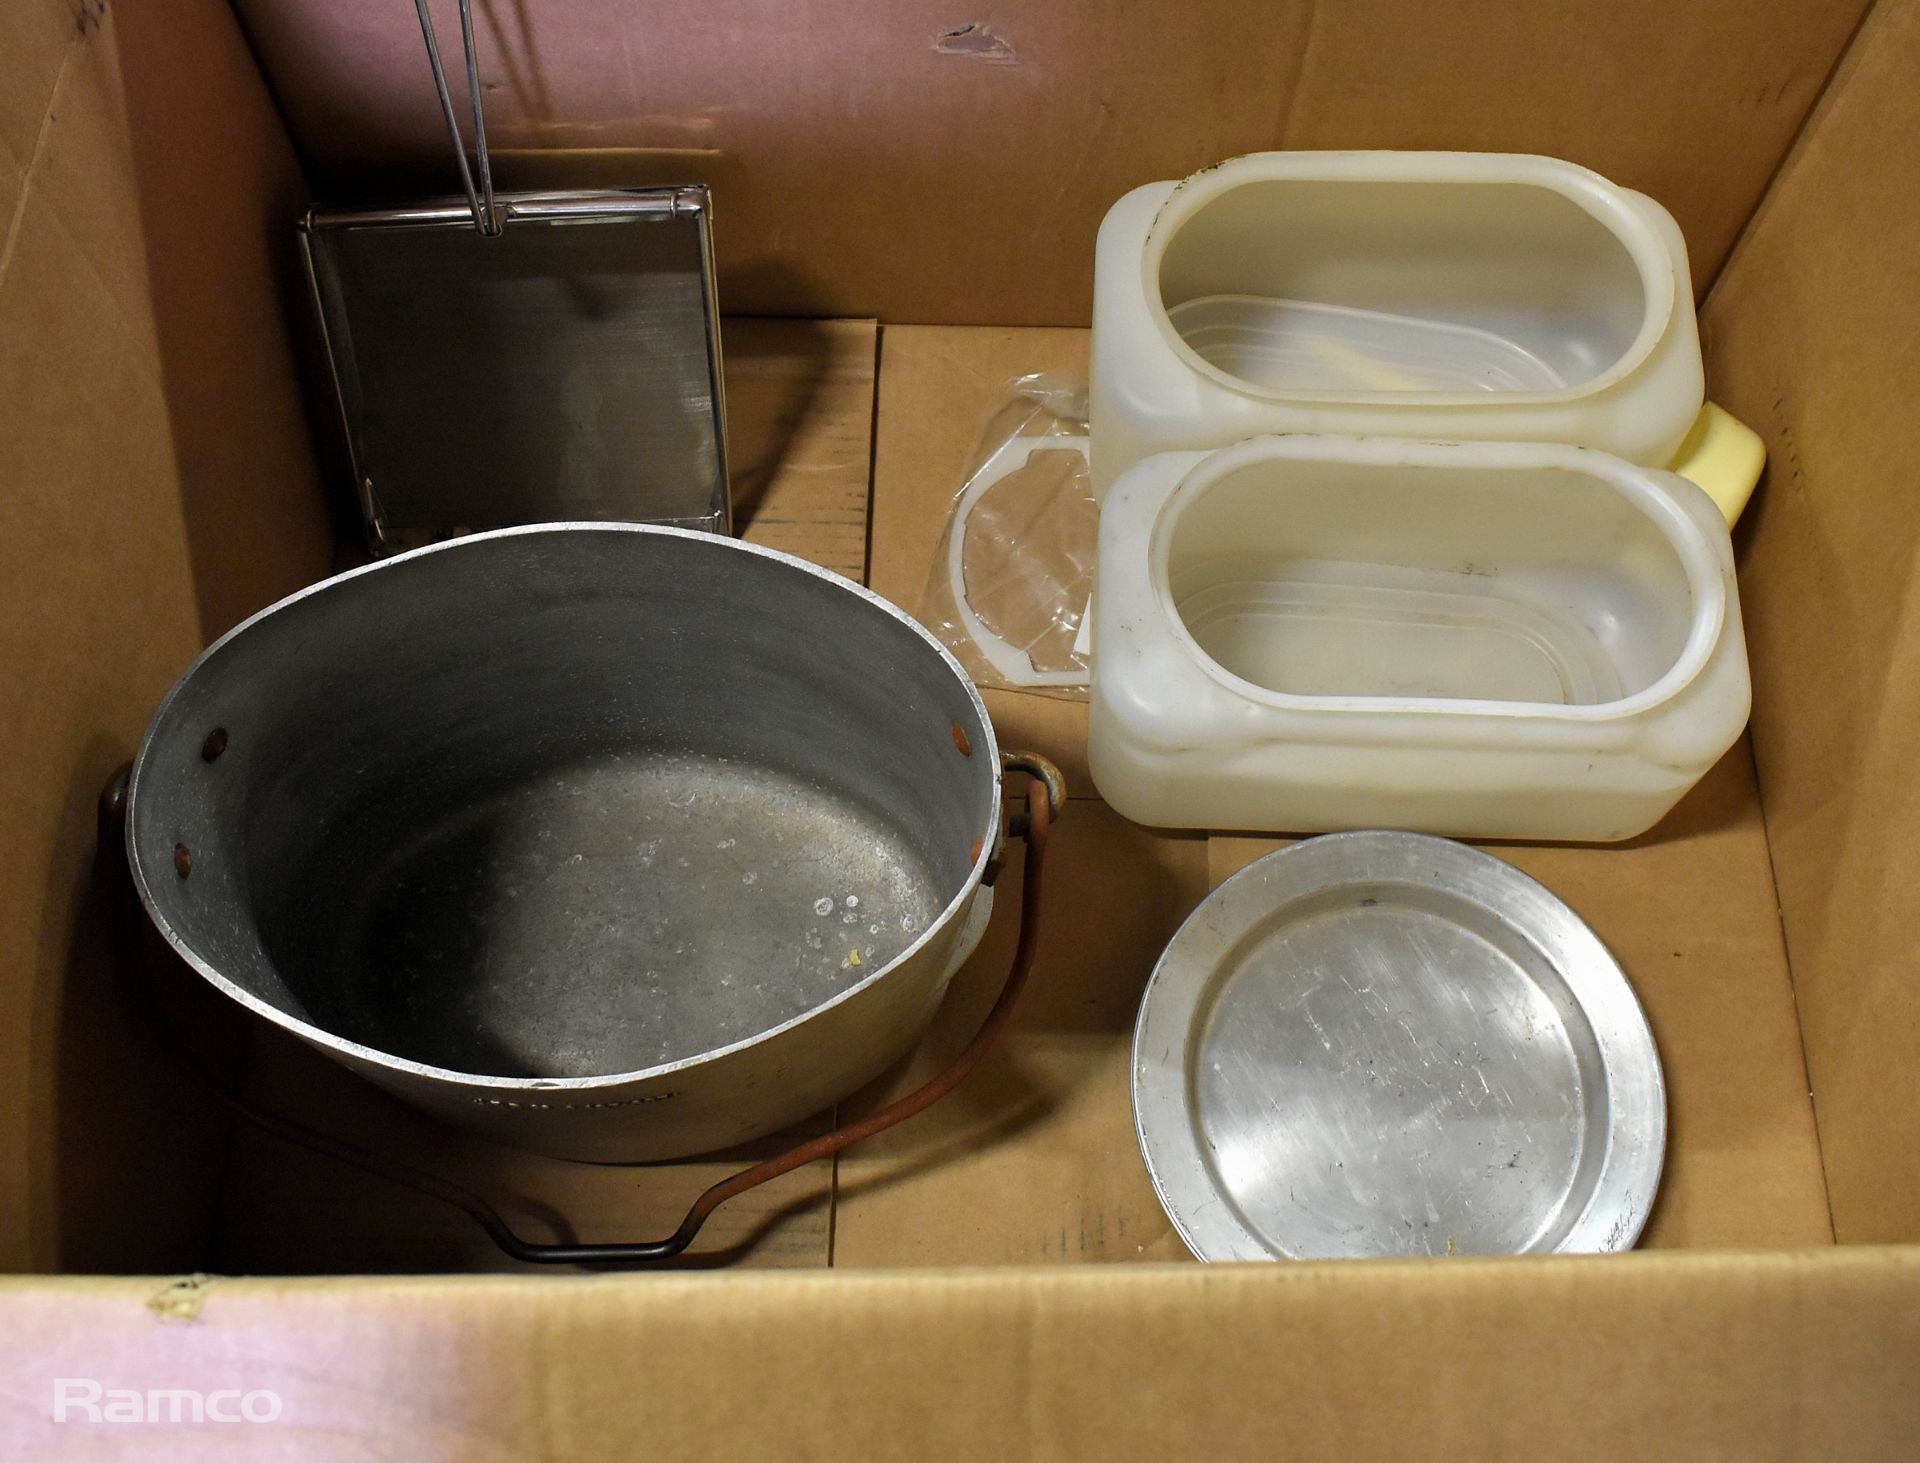 Catering supplies - Pans, baking trays, countertop tin opener, sieve - Image 7 of 7